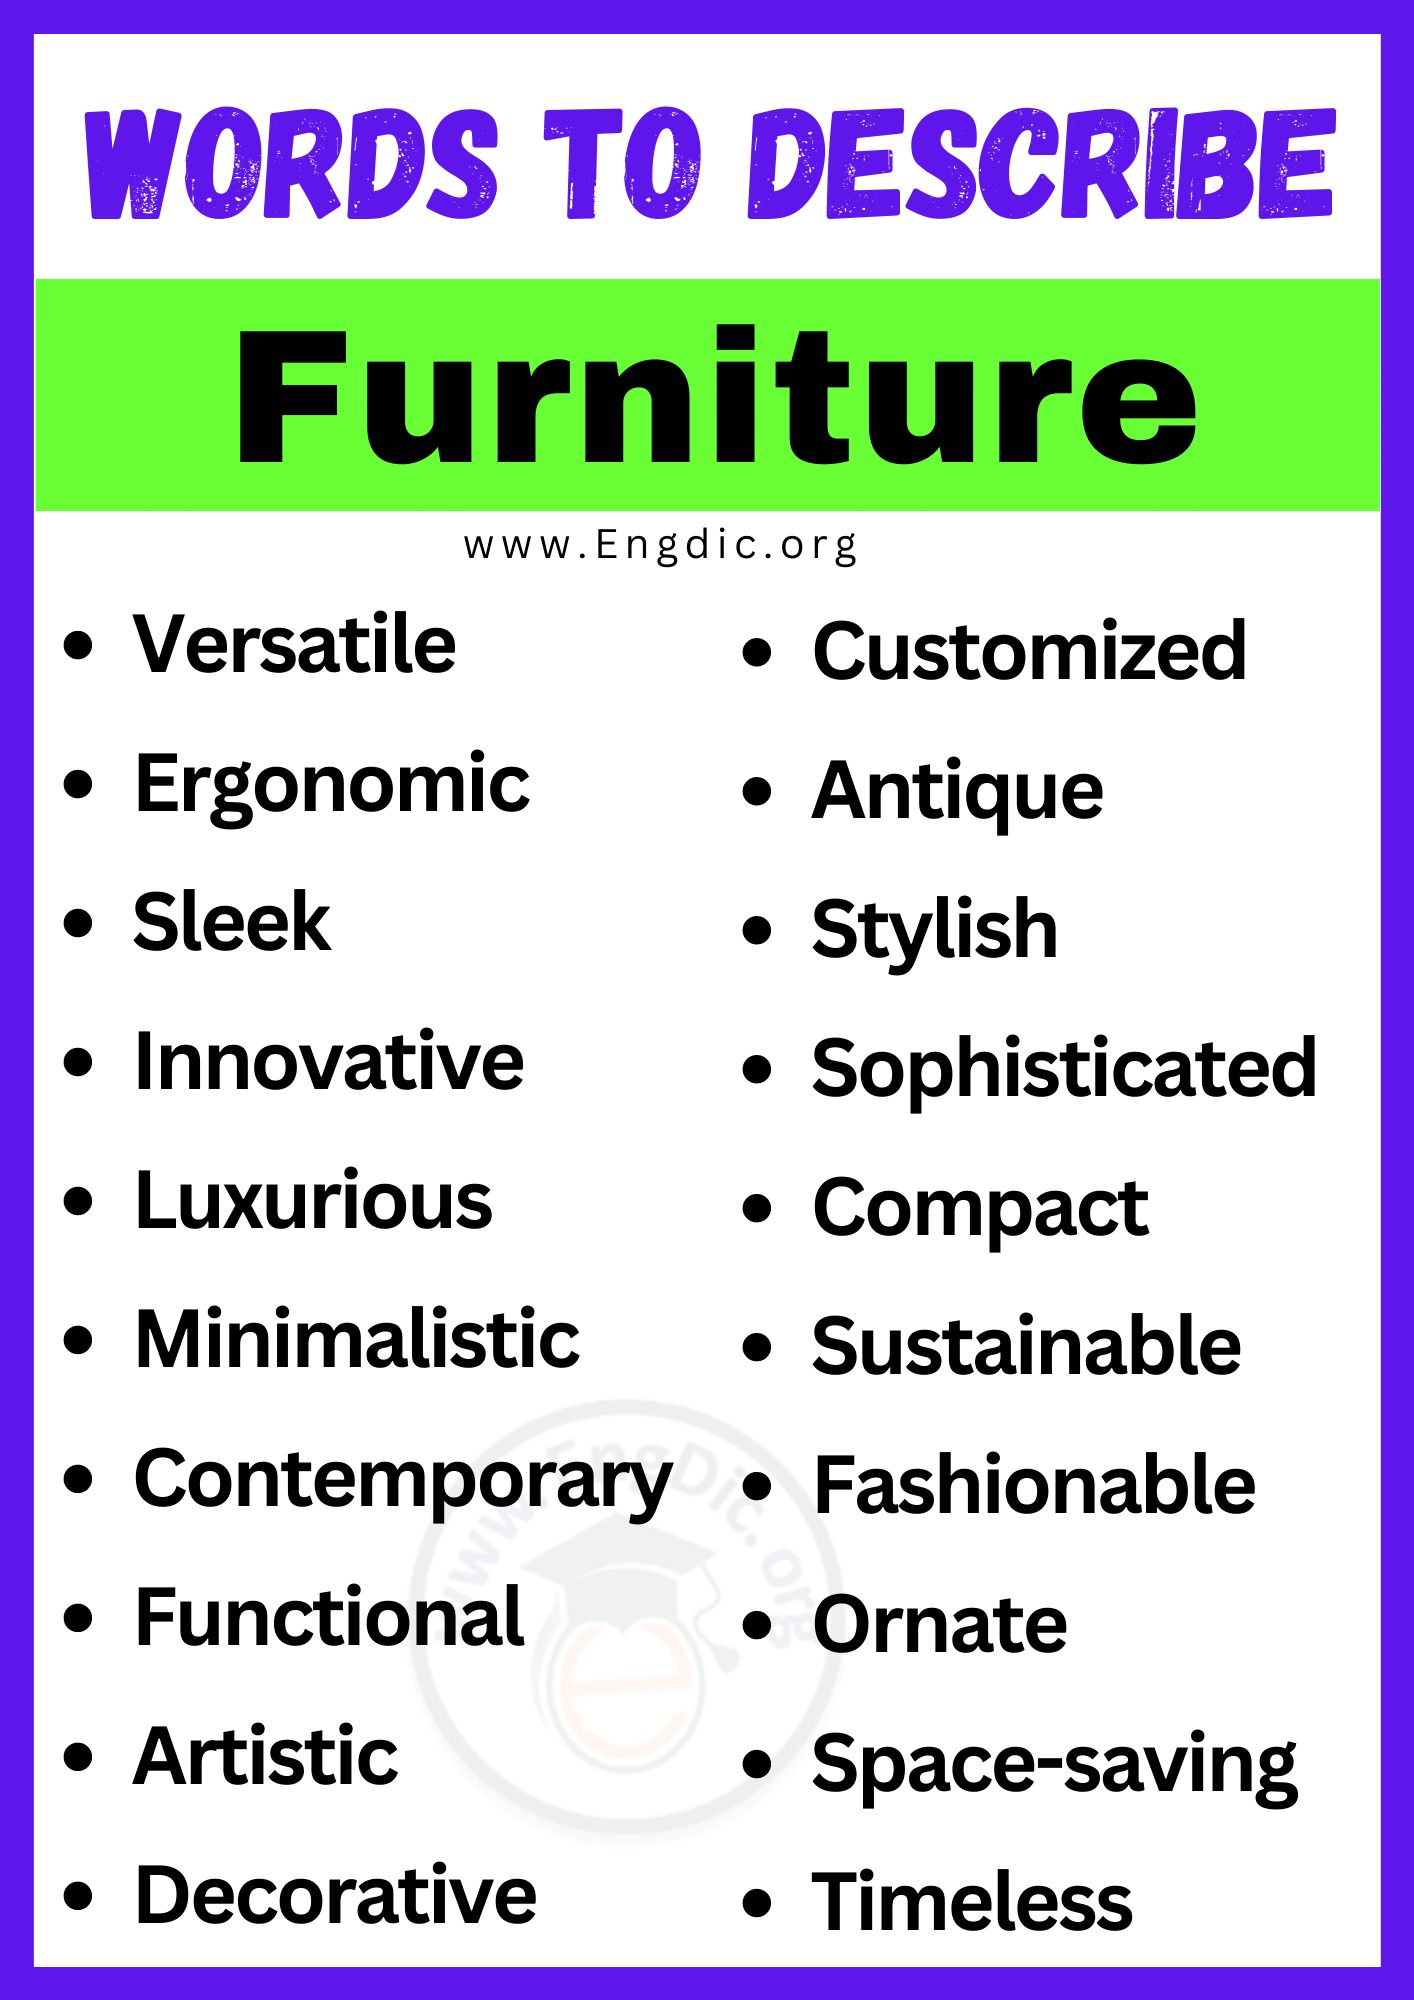 Words to Describe Furniture